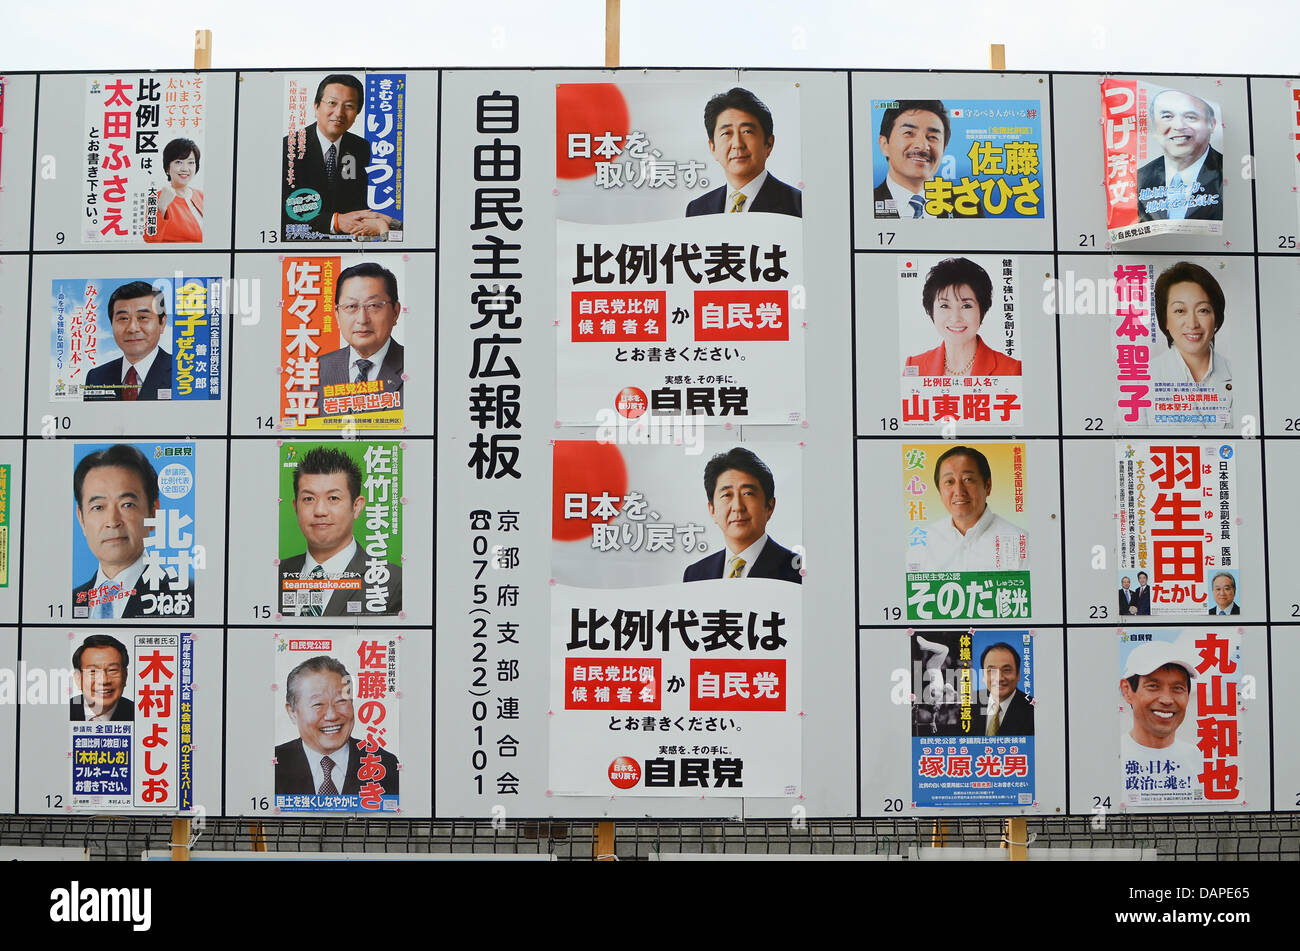 Kyoto, Japan. 17th July, 2013. Politicians in Japan enter the final days of campaigning ahead of Sunday's upper house election. Led by prime minister Shinzo Abe (pictured centre), the ruling Liberal Democratic Party (together with coalition partner New Komeito) is expected to score a big win. Credit:  Trevor Mogg / Alamy Live News Stock Photo